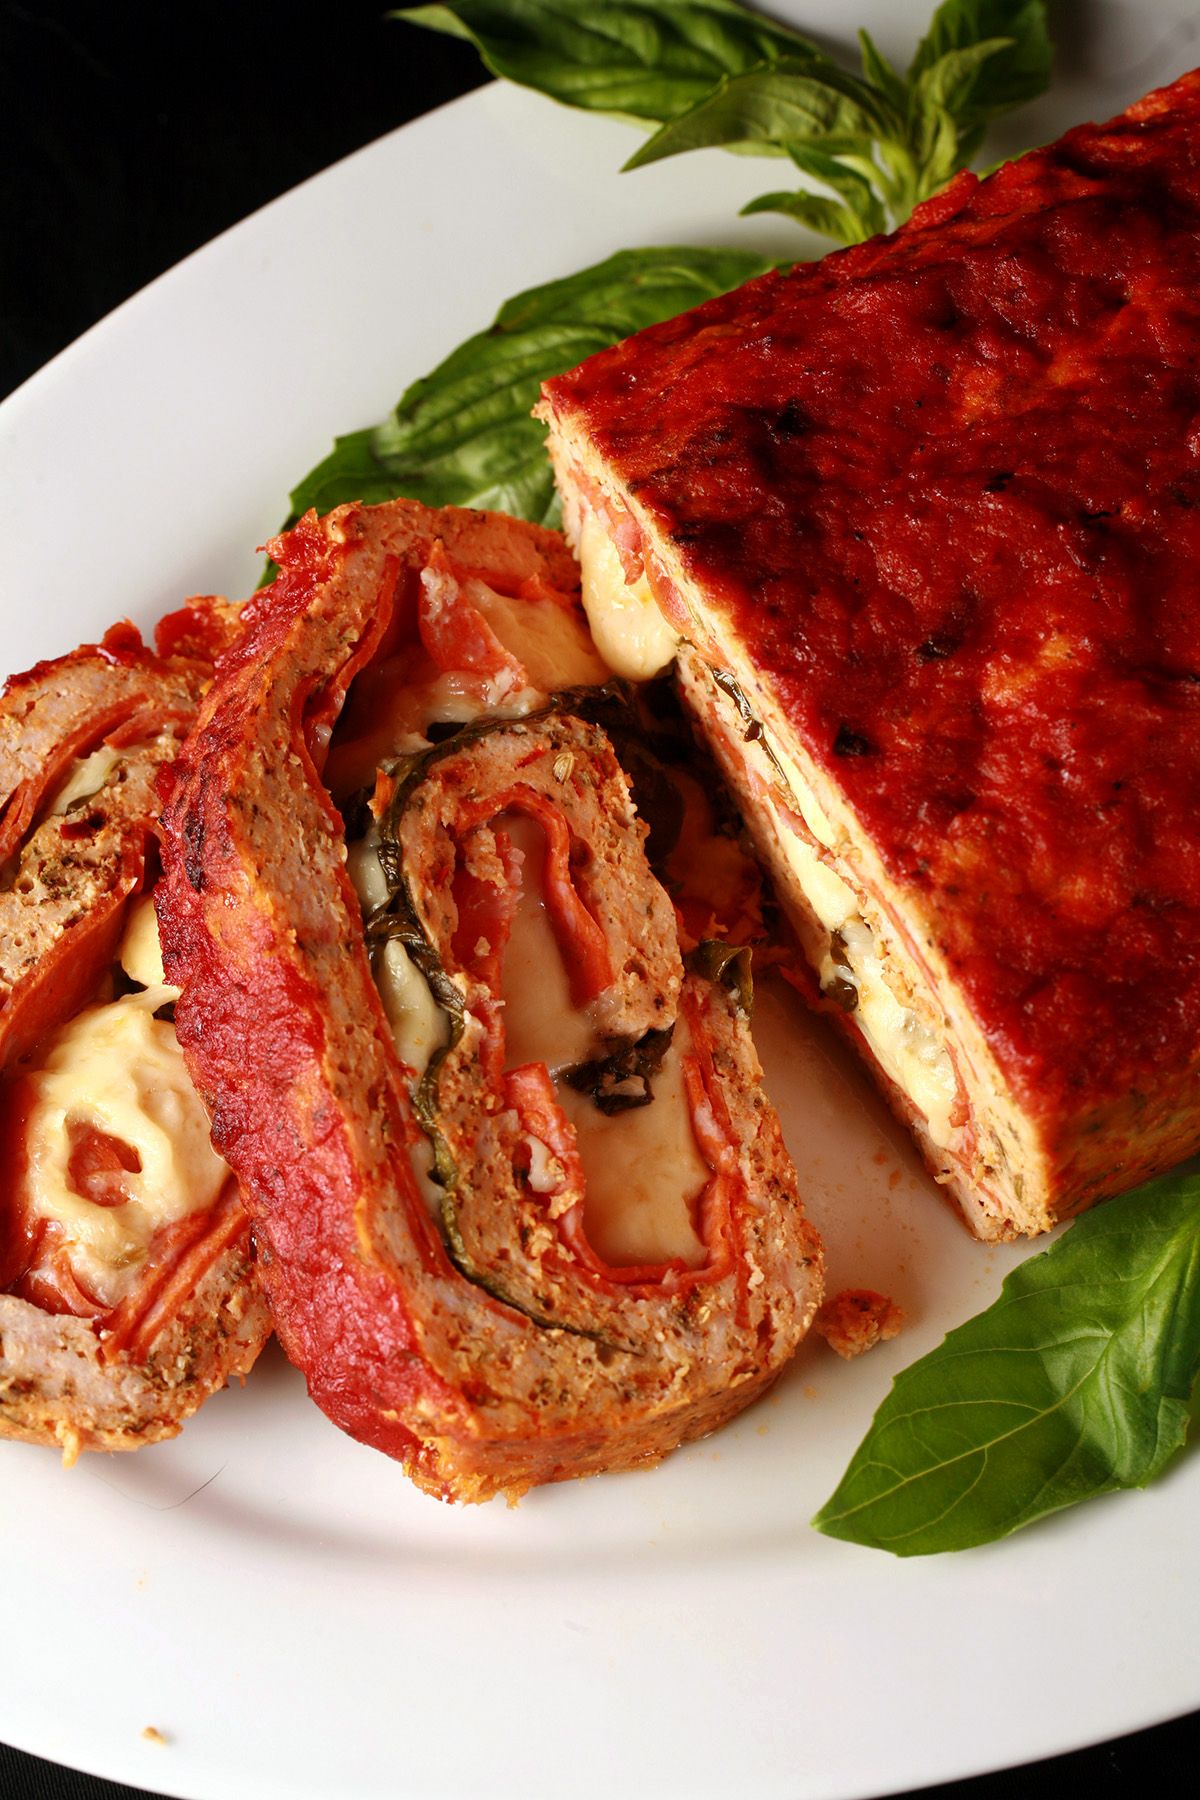 Low carb stromboli meatloaf on a plate.